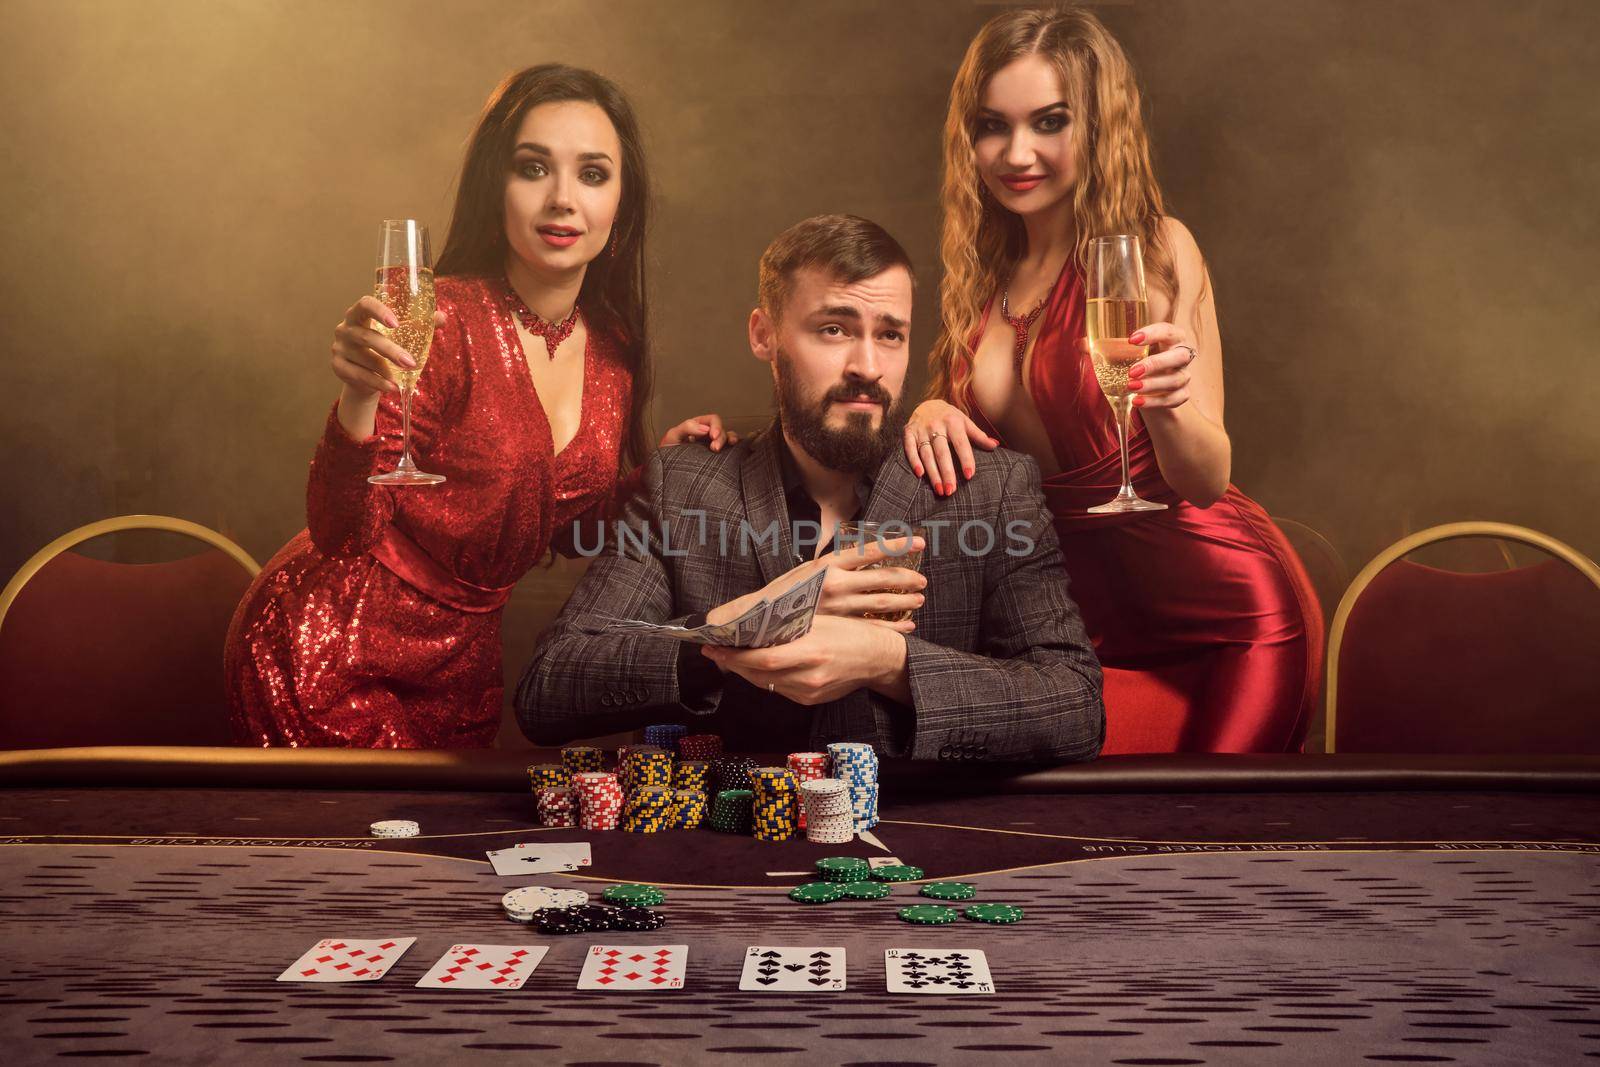 Two attractive maidens and good-looking man are playing poker at casino. They are holding their cash winning, smiling and looking happy while posing at the table against a yellow backlight on smoke background. Cards, chips, money, gambling, entertainment concept.